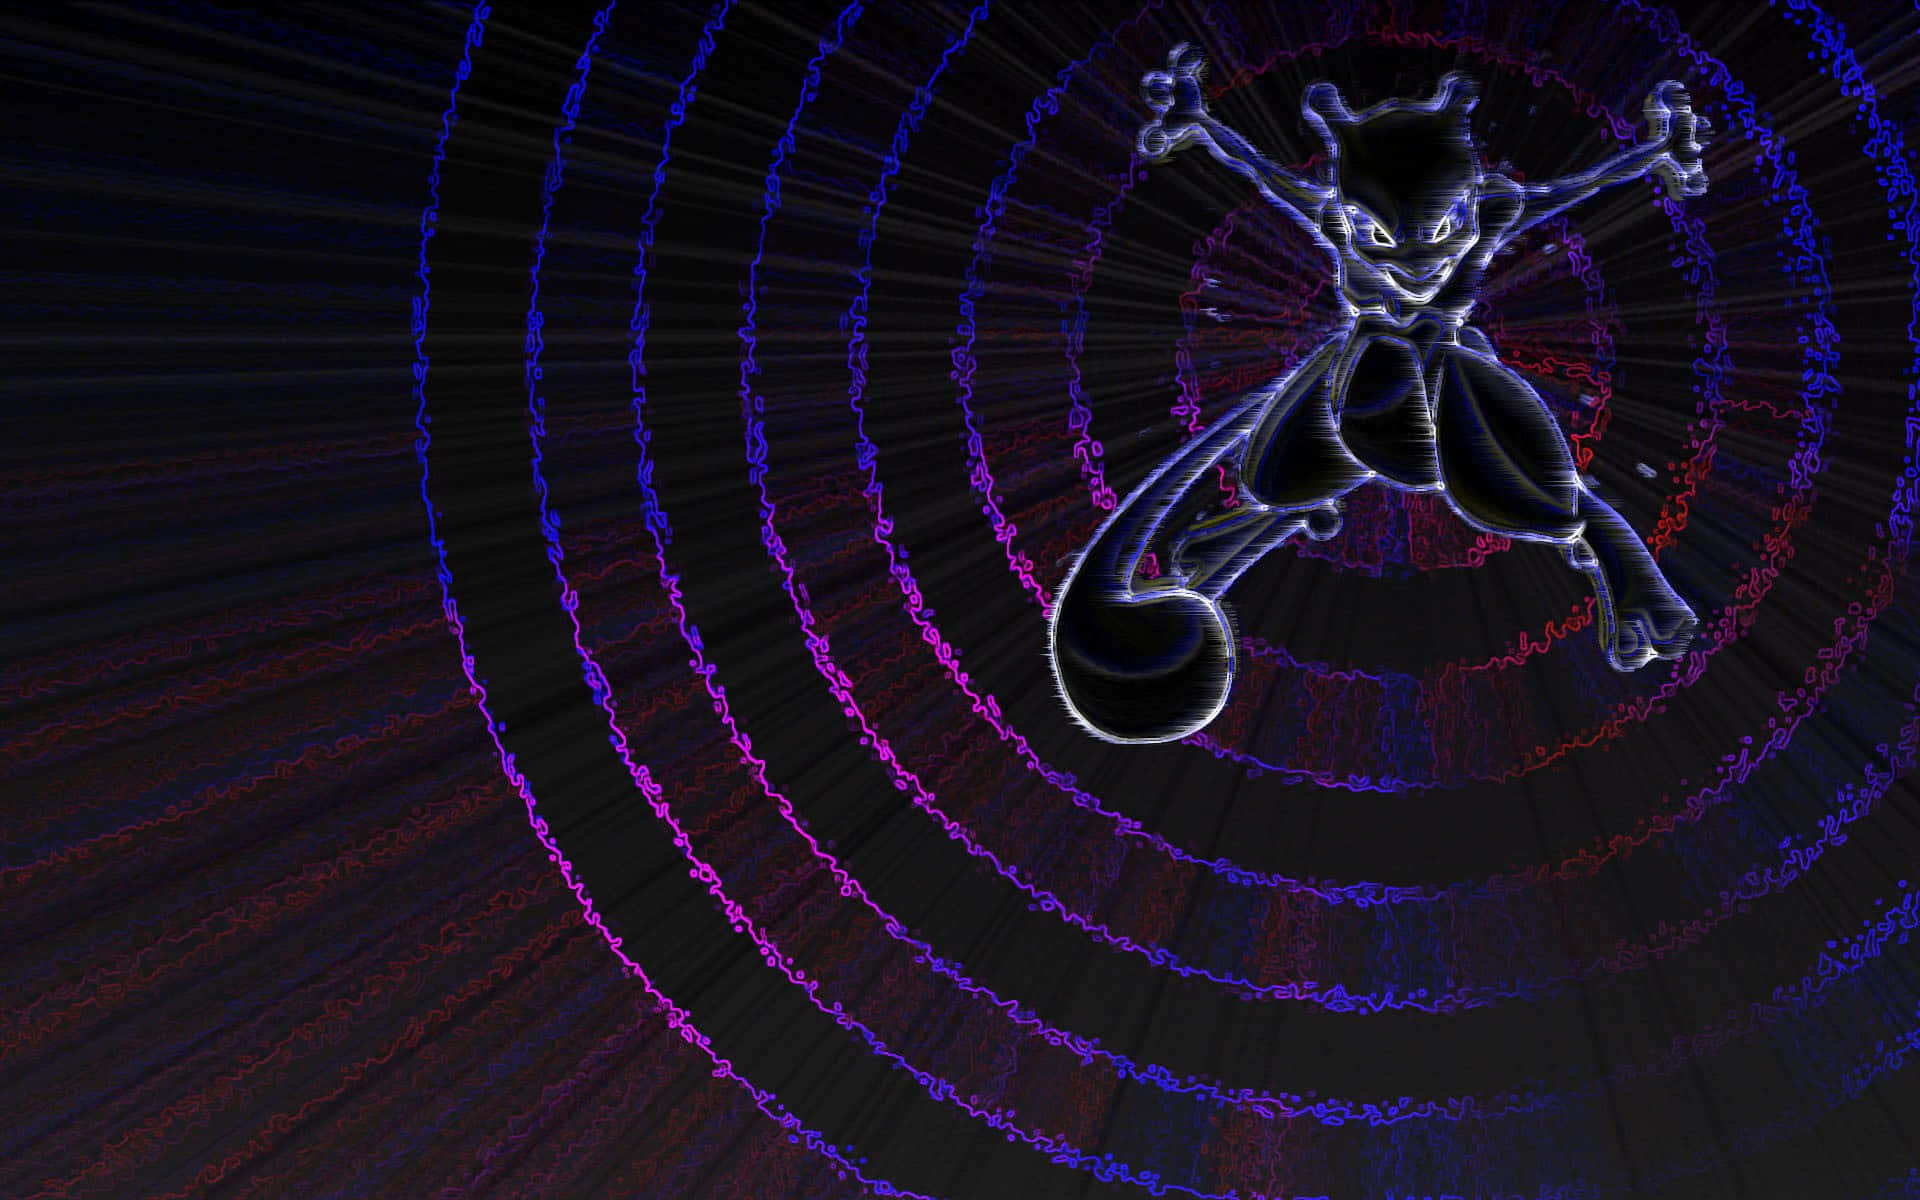 Unlock the power of your mind with the legendary Pokémon Mewtwo